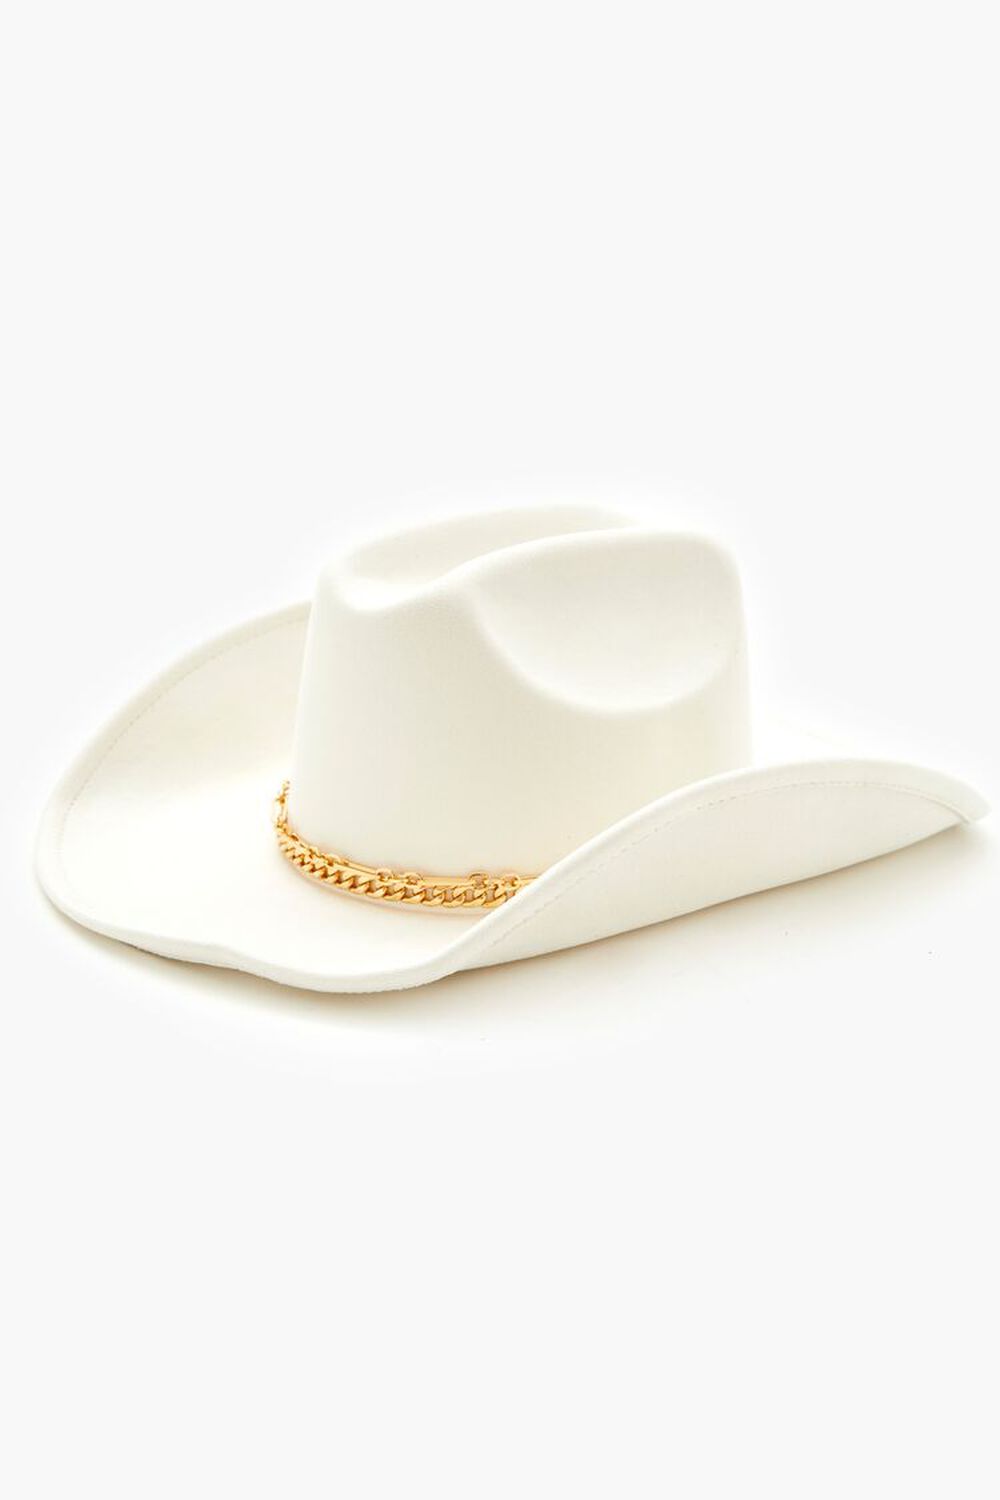 WHITE/GOLD Chain-Trim Brushed Cowboy Hat, image 2